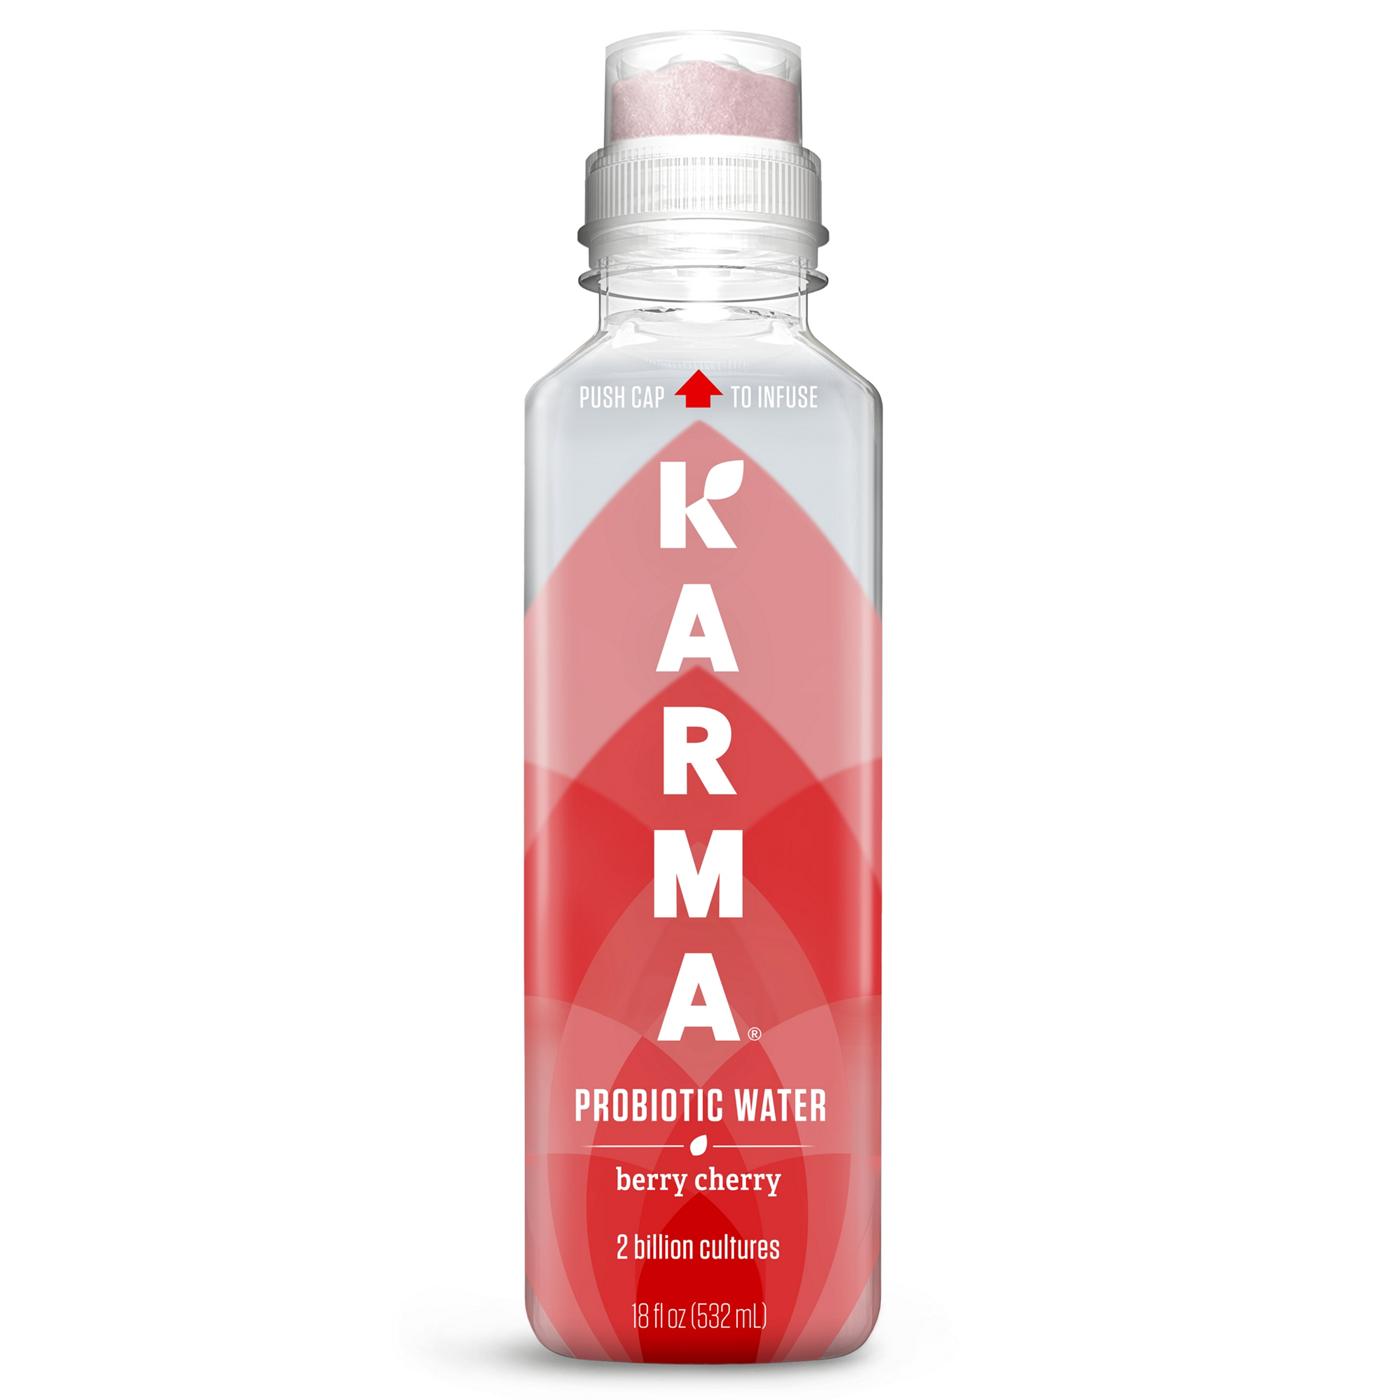 Karma Berry Cherry Probiotic Water; image 1 of 3